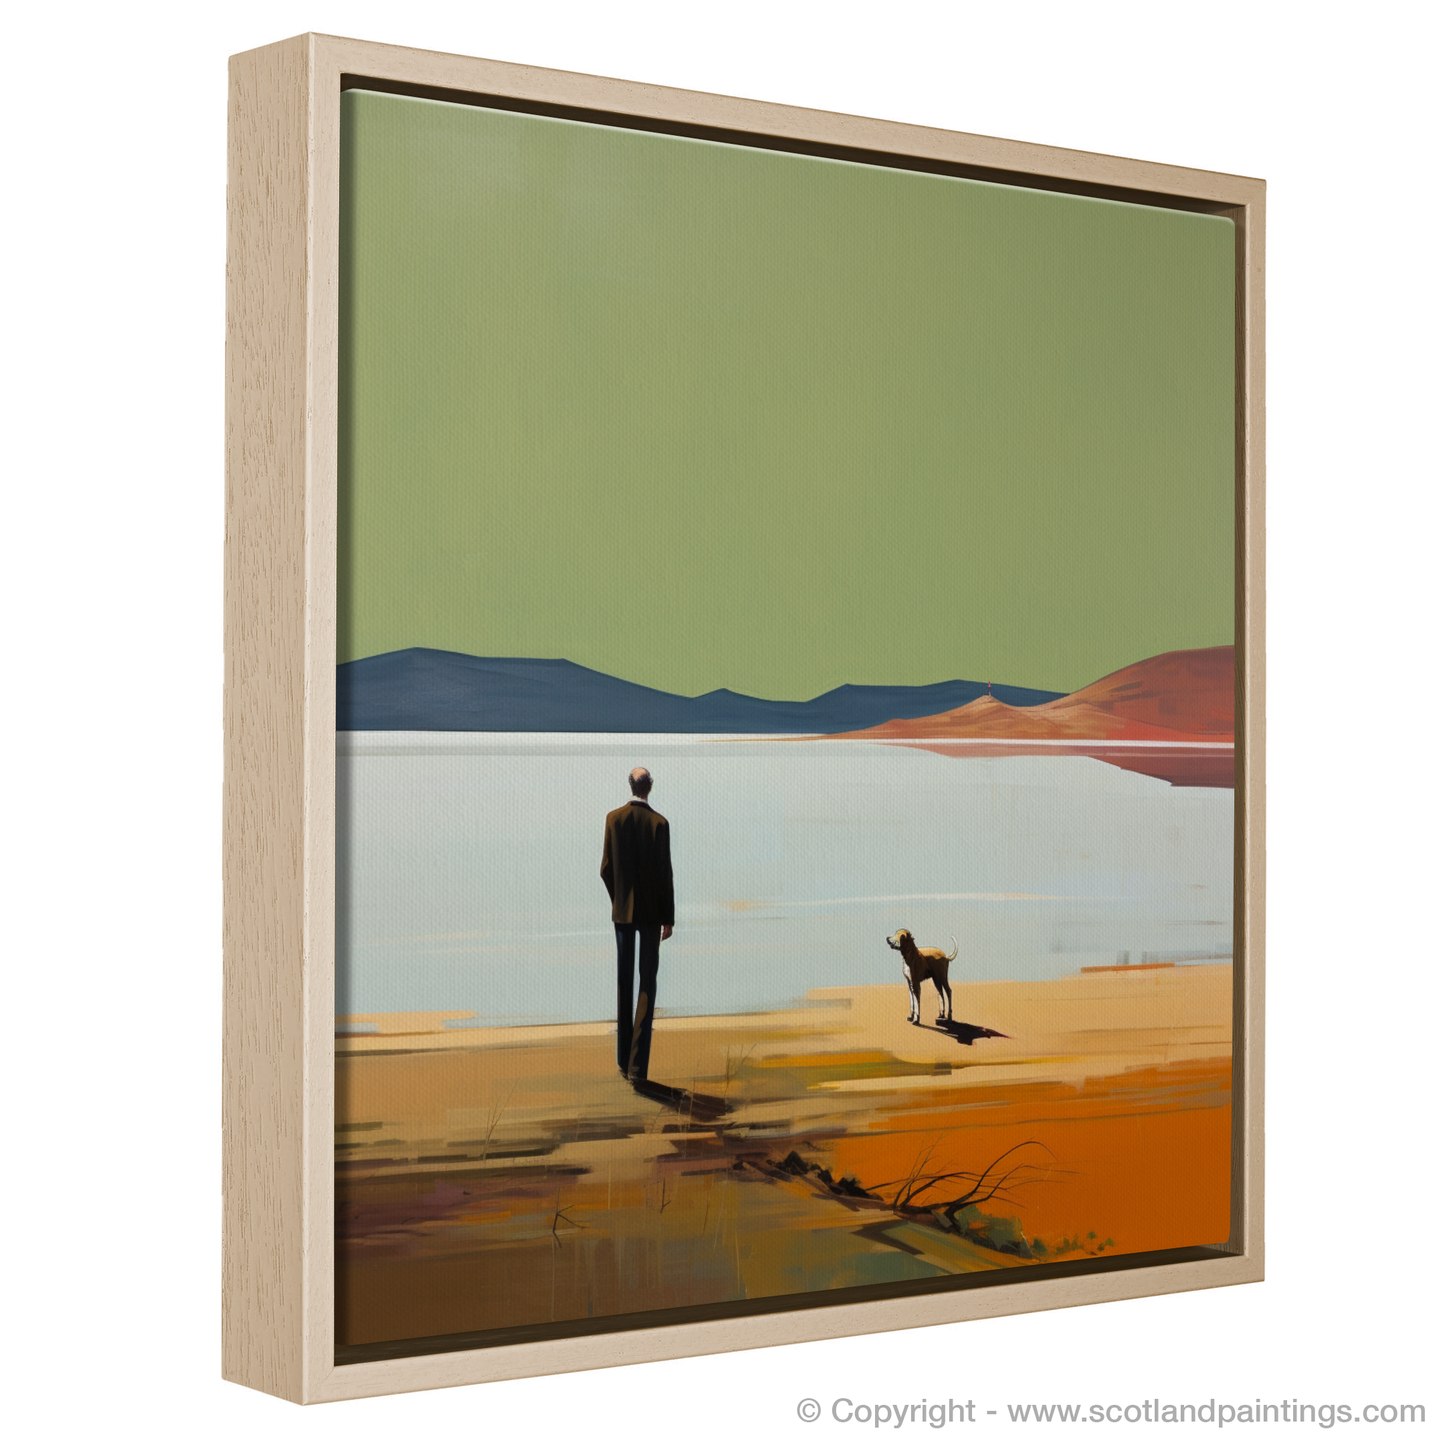 Painting and Art Print of A man walking dog at the side of Loch Lomond entitled "Walking with Solitude: A Loch Lomond Reflection".